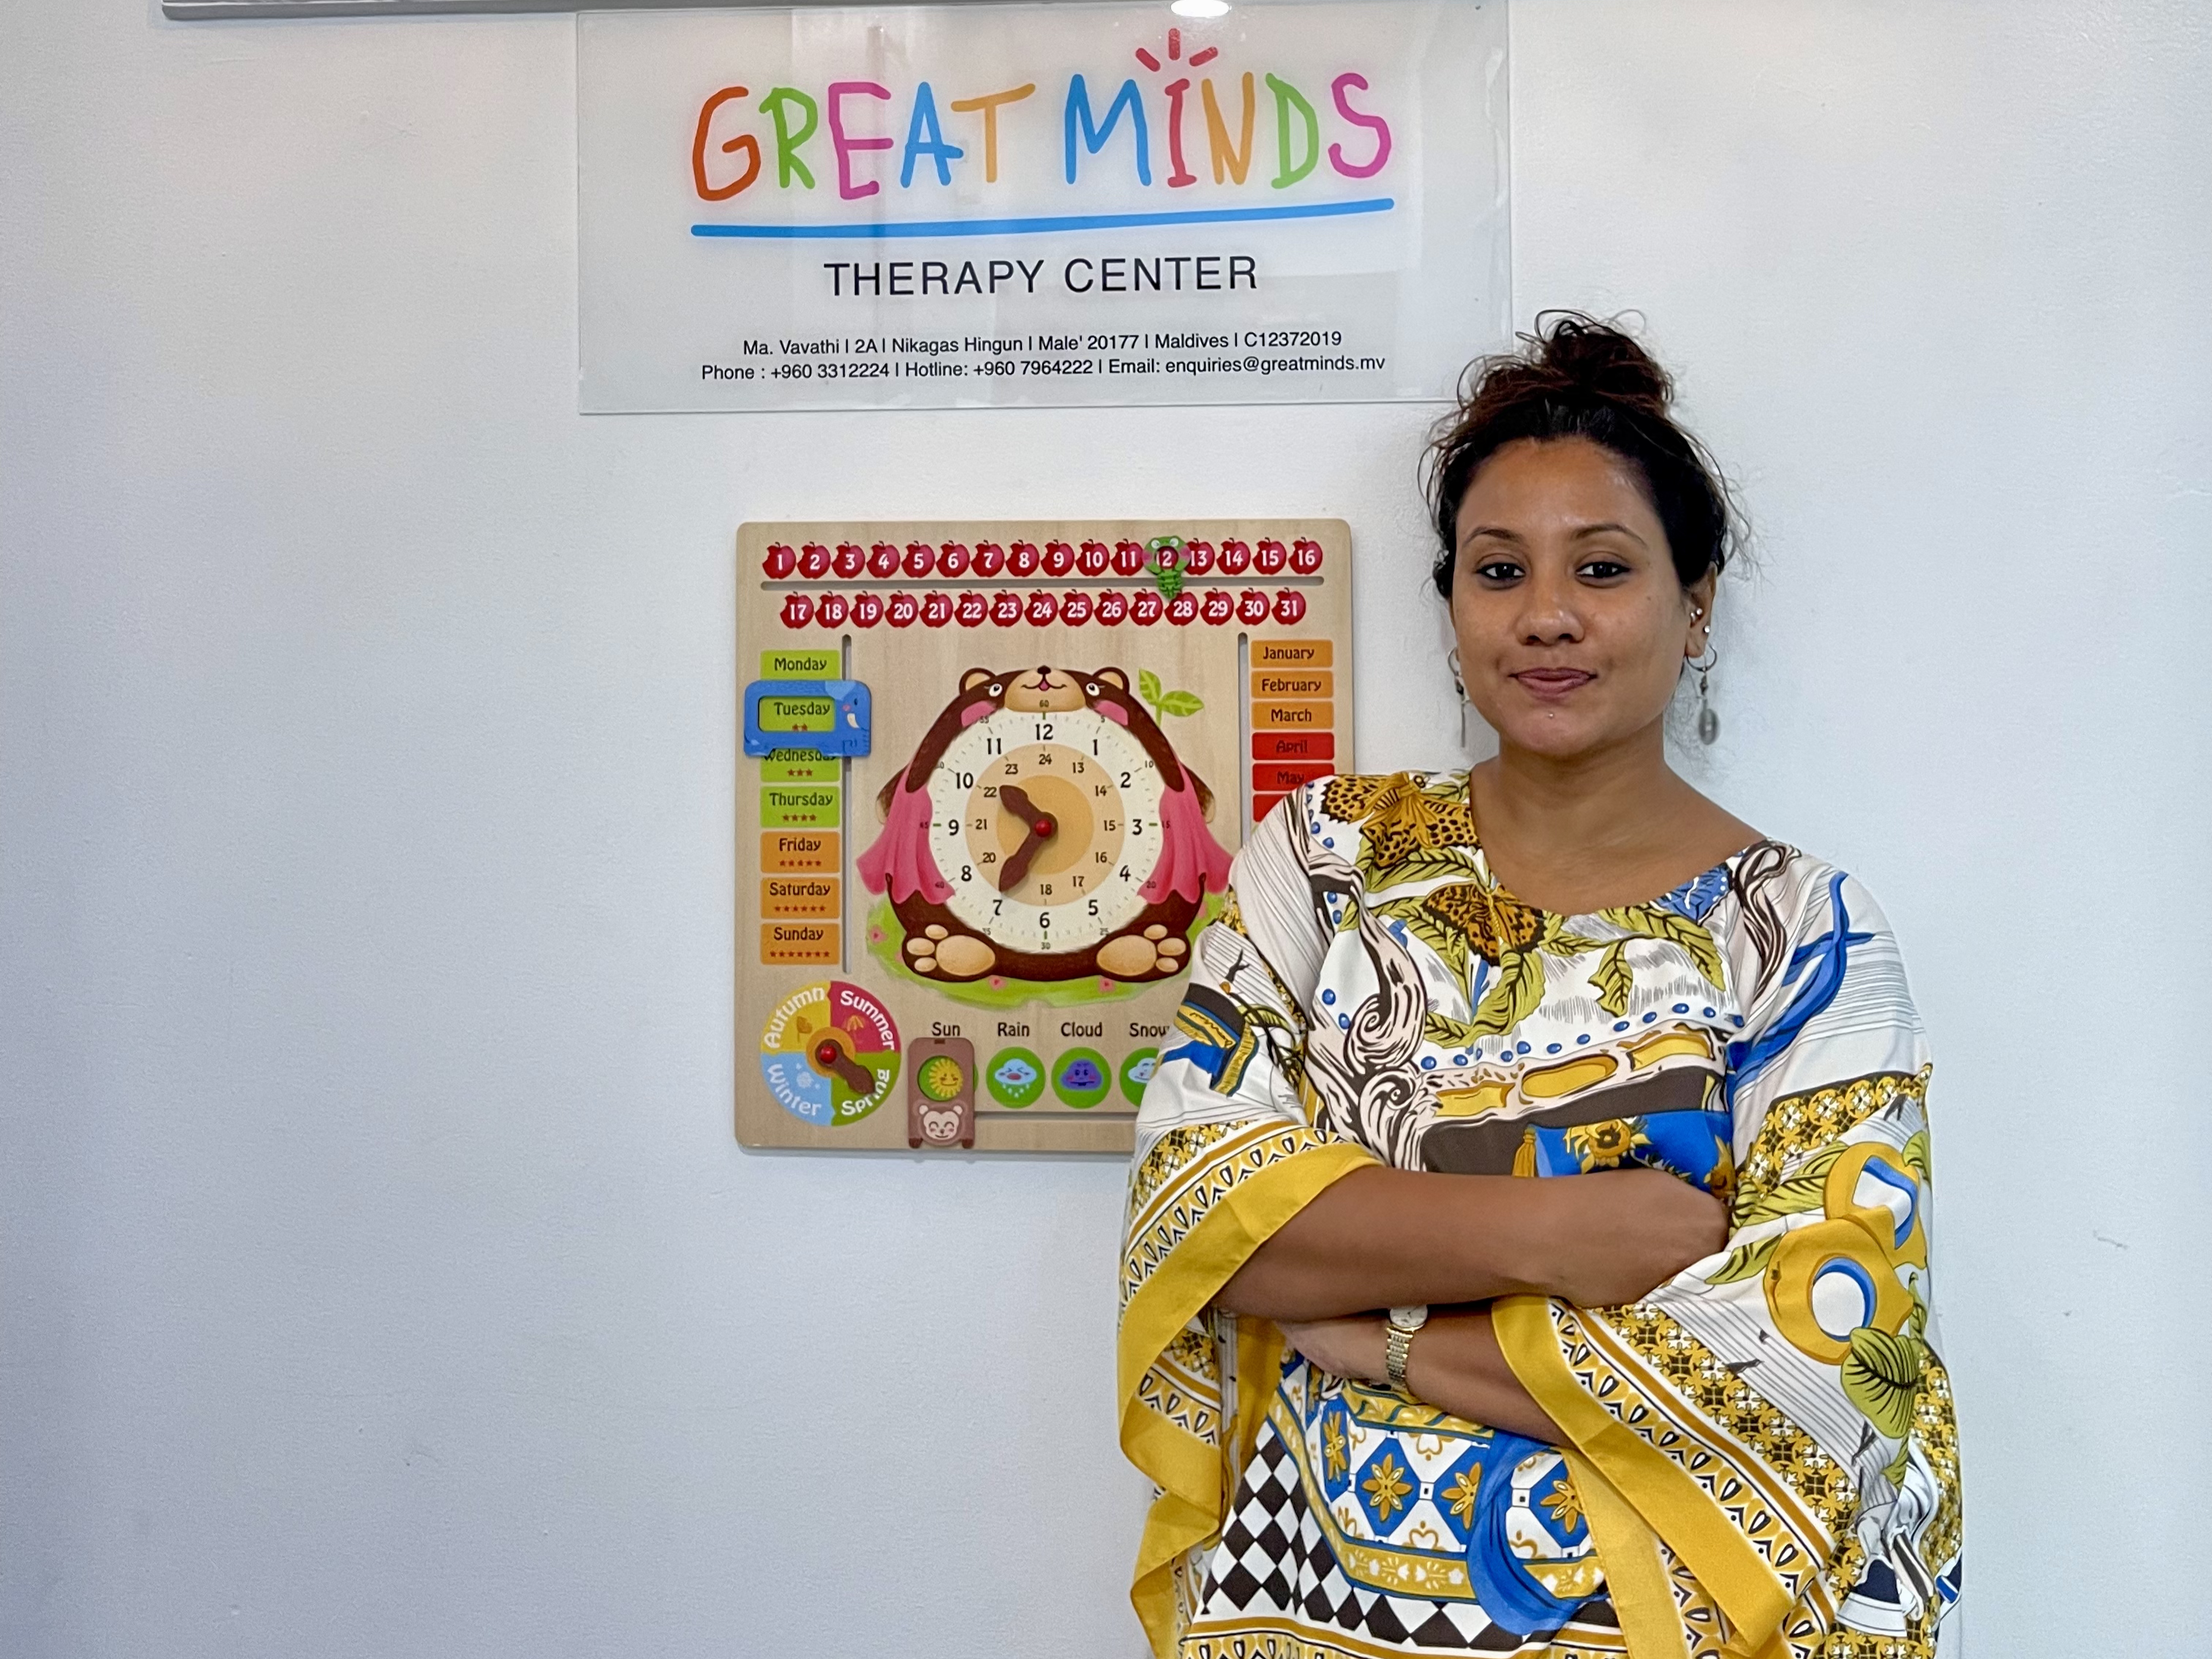 Muna at the ‘Great Minds Therapy Center’, her initiative for fostering growth and change in the community. © Muna